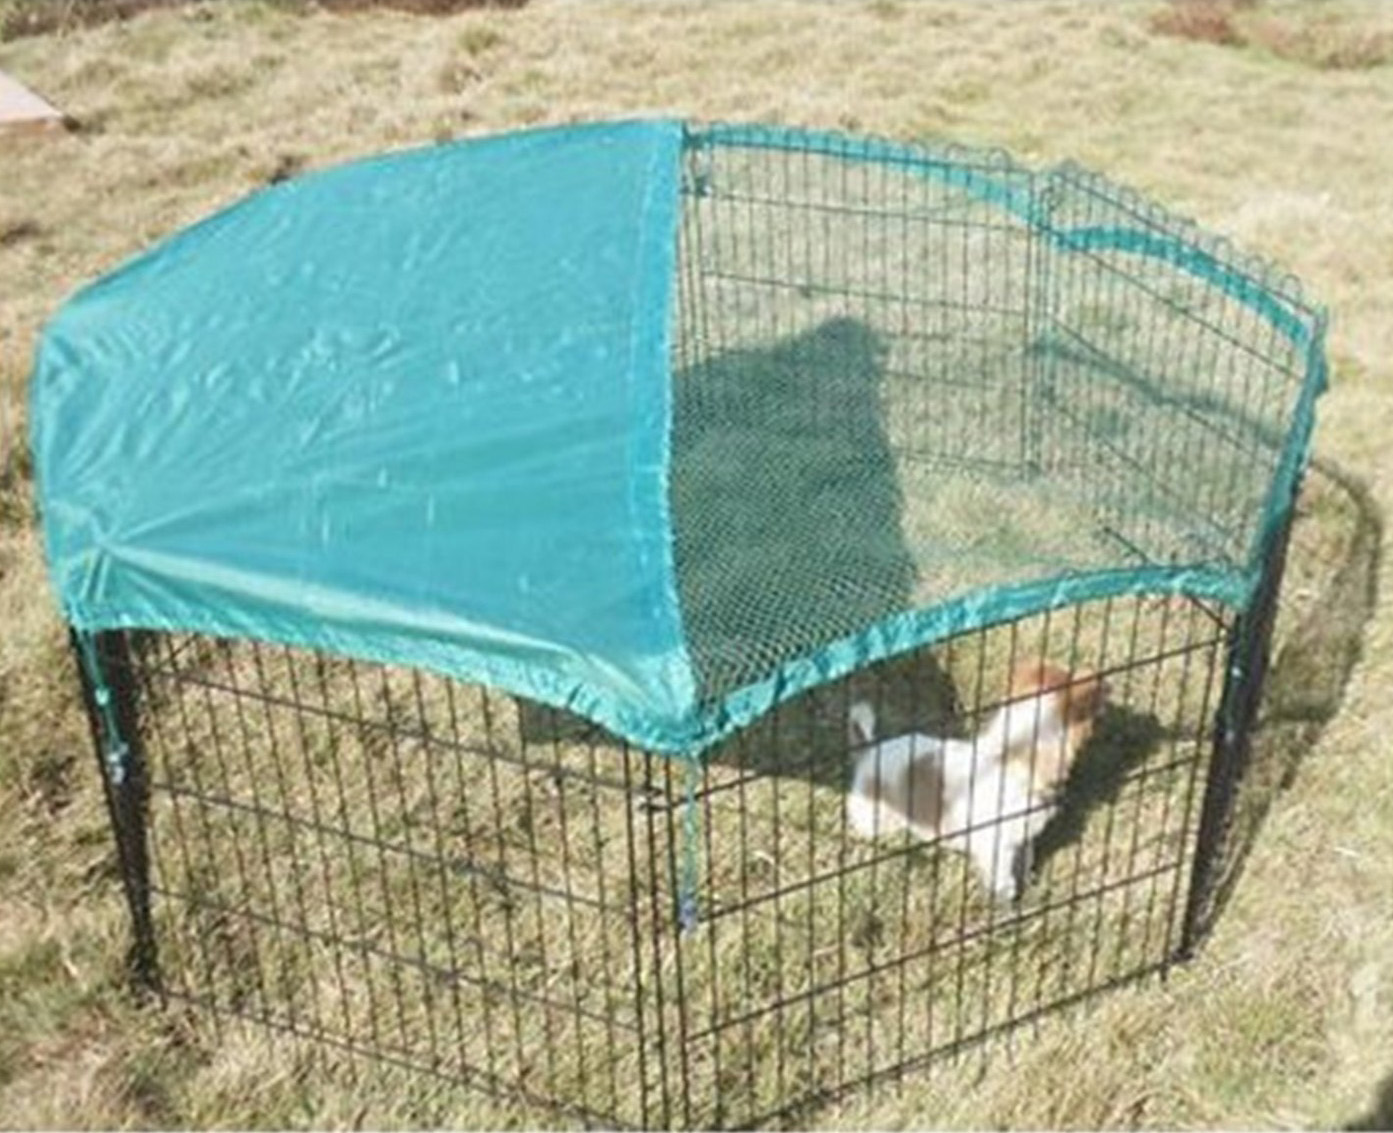 Dog Enclosure Pet Metal Playpen with Cover